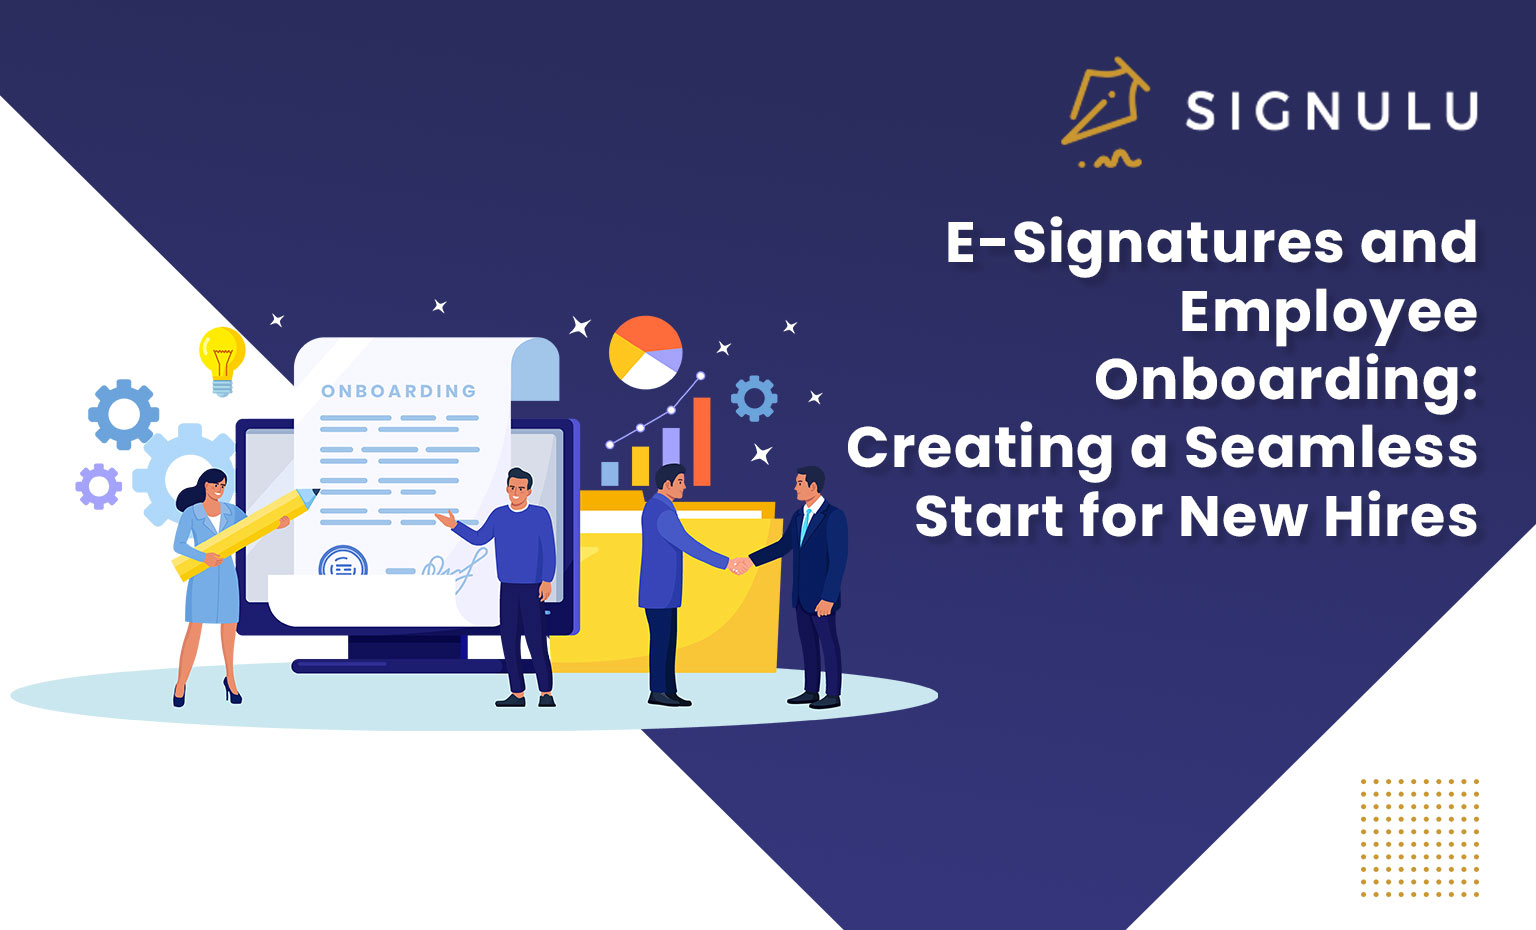 E-Signatures and Employee Onboarding: Creating a Seamless Start for New Hires